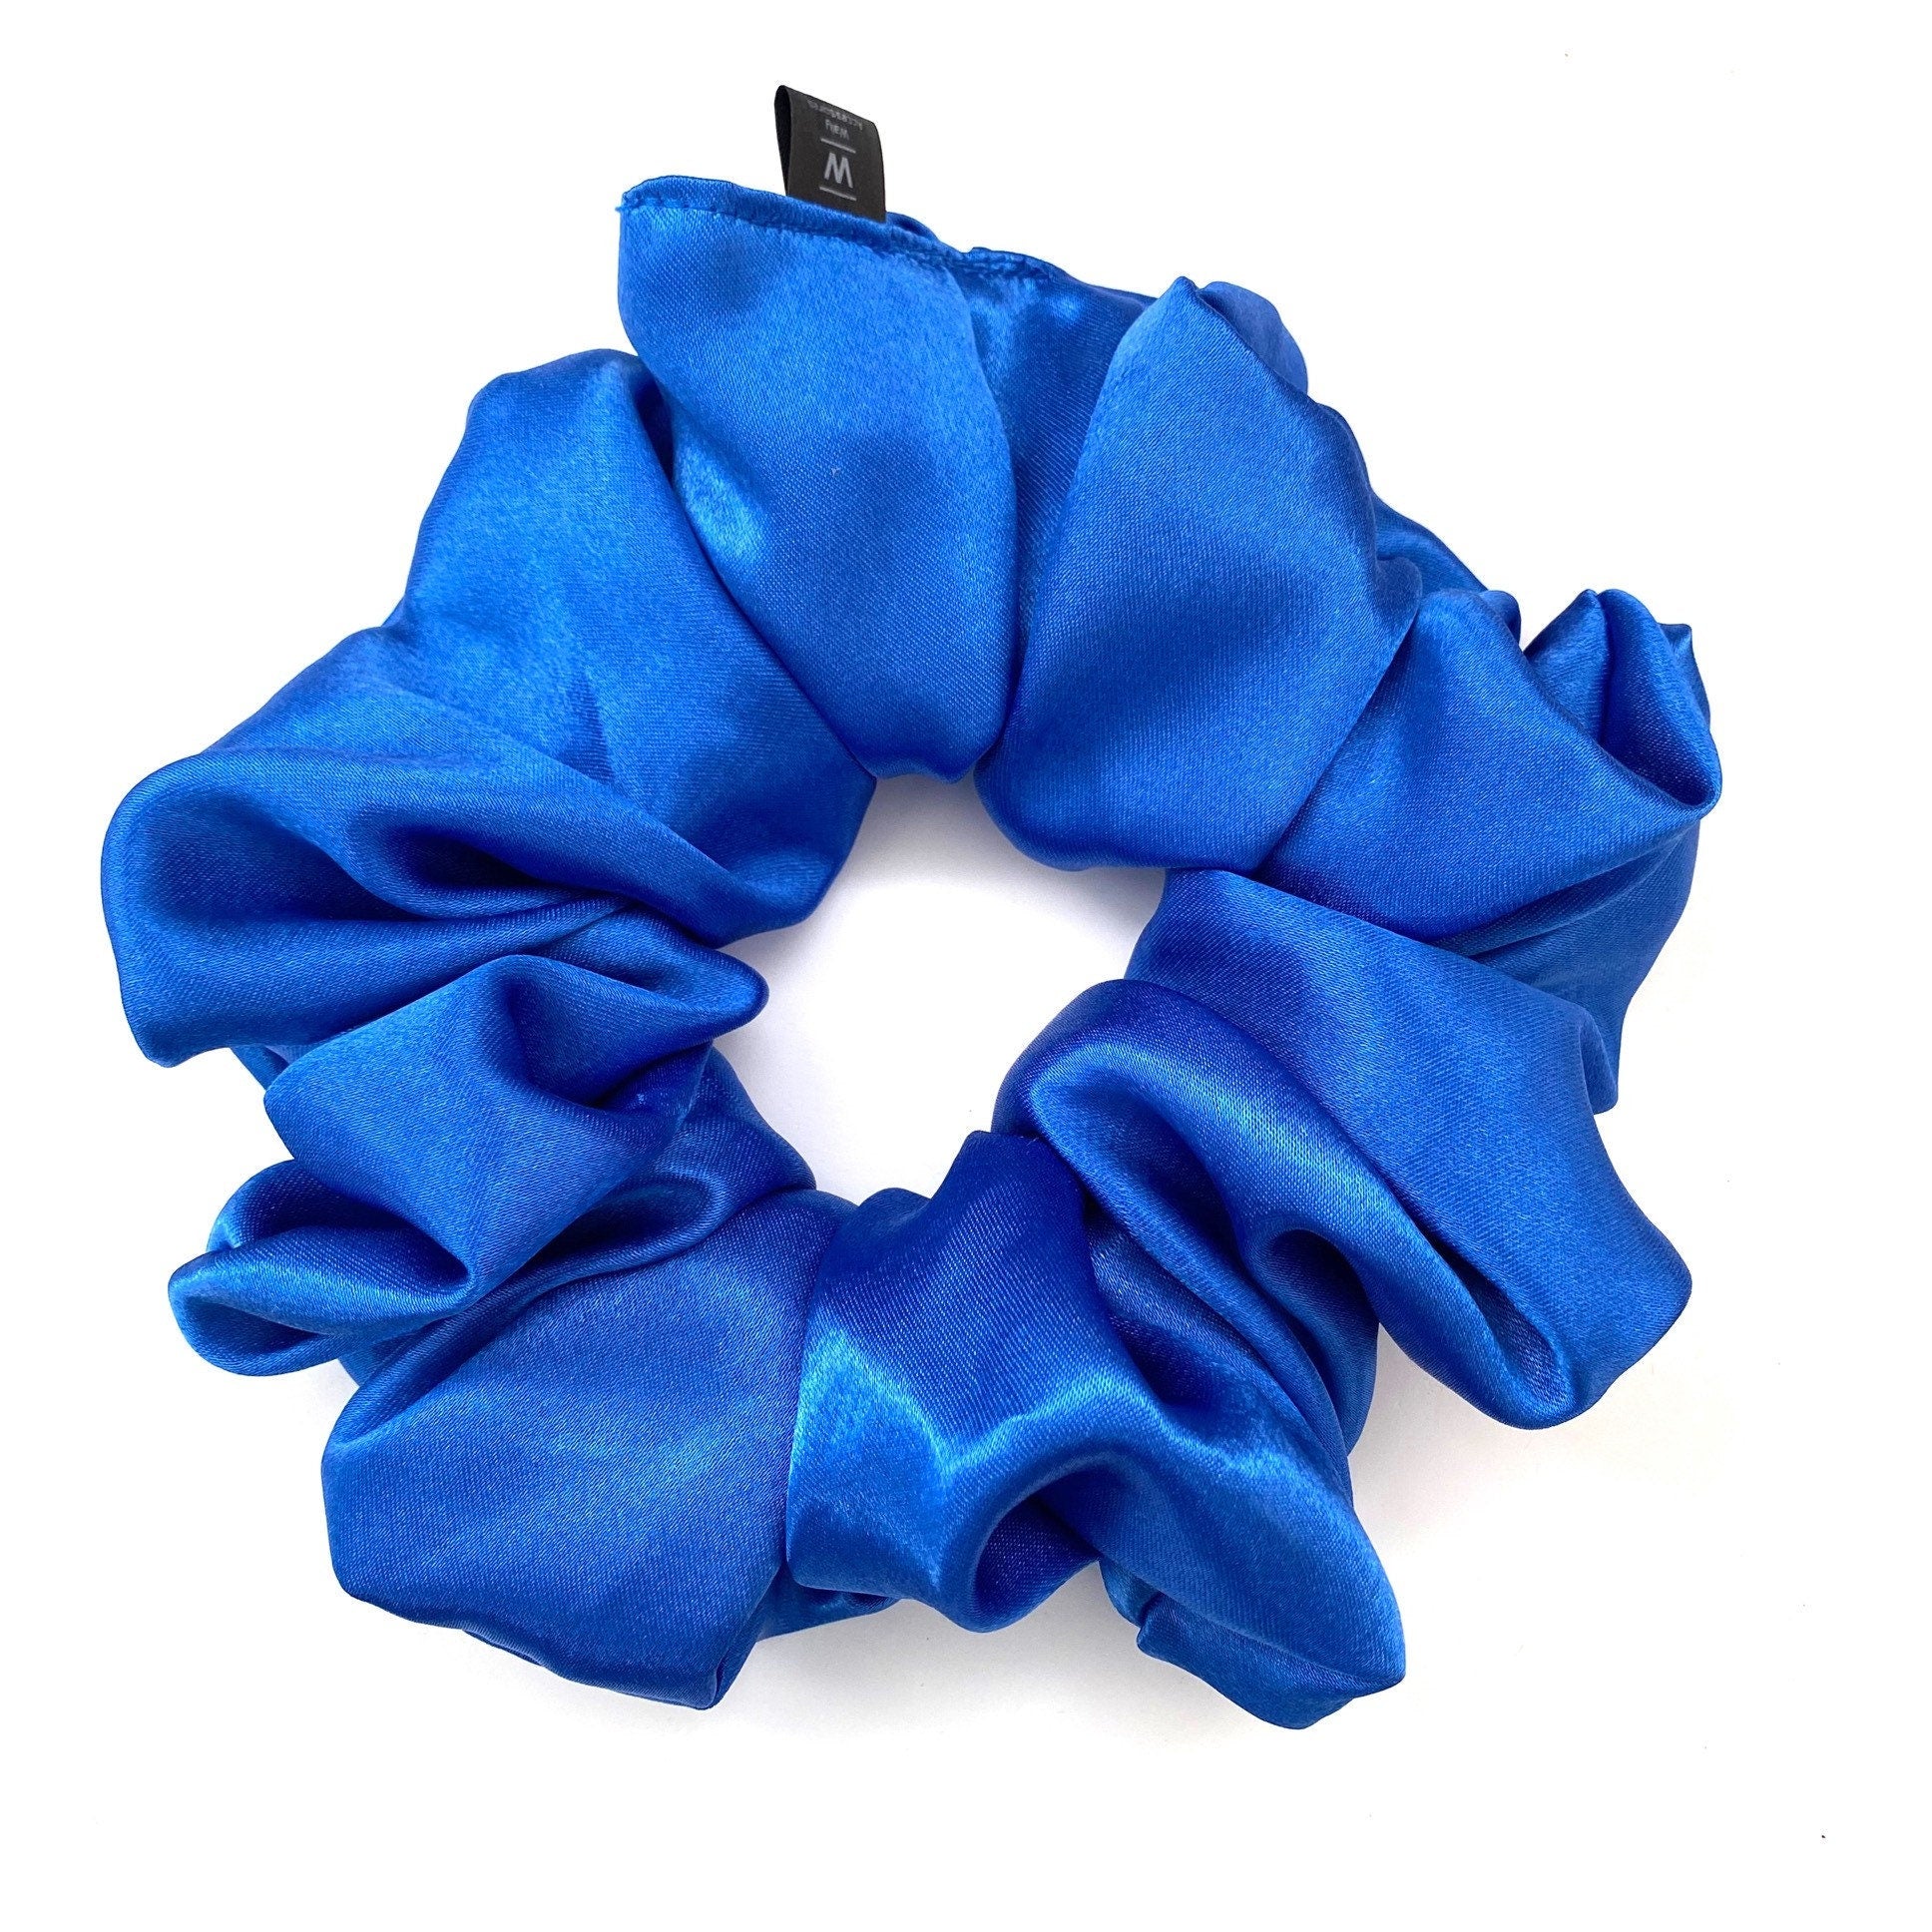 XL- Extra Large Oversized Satin Hair Scrunchie - Electric Blue